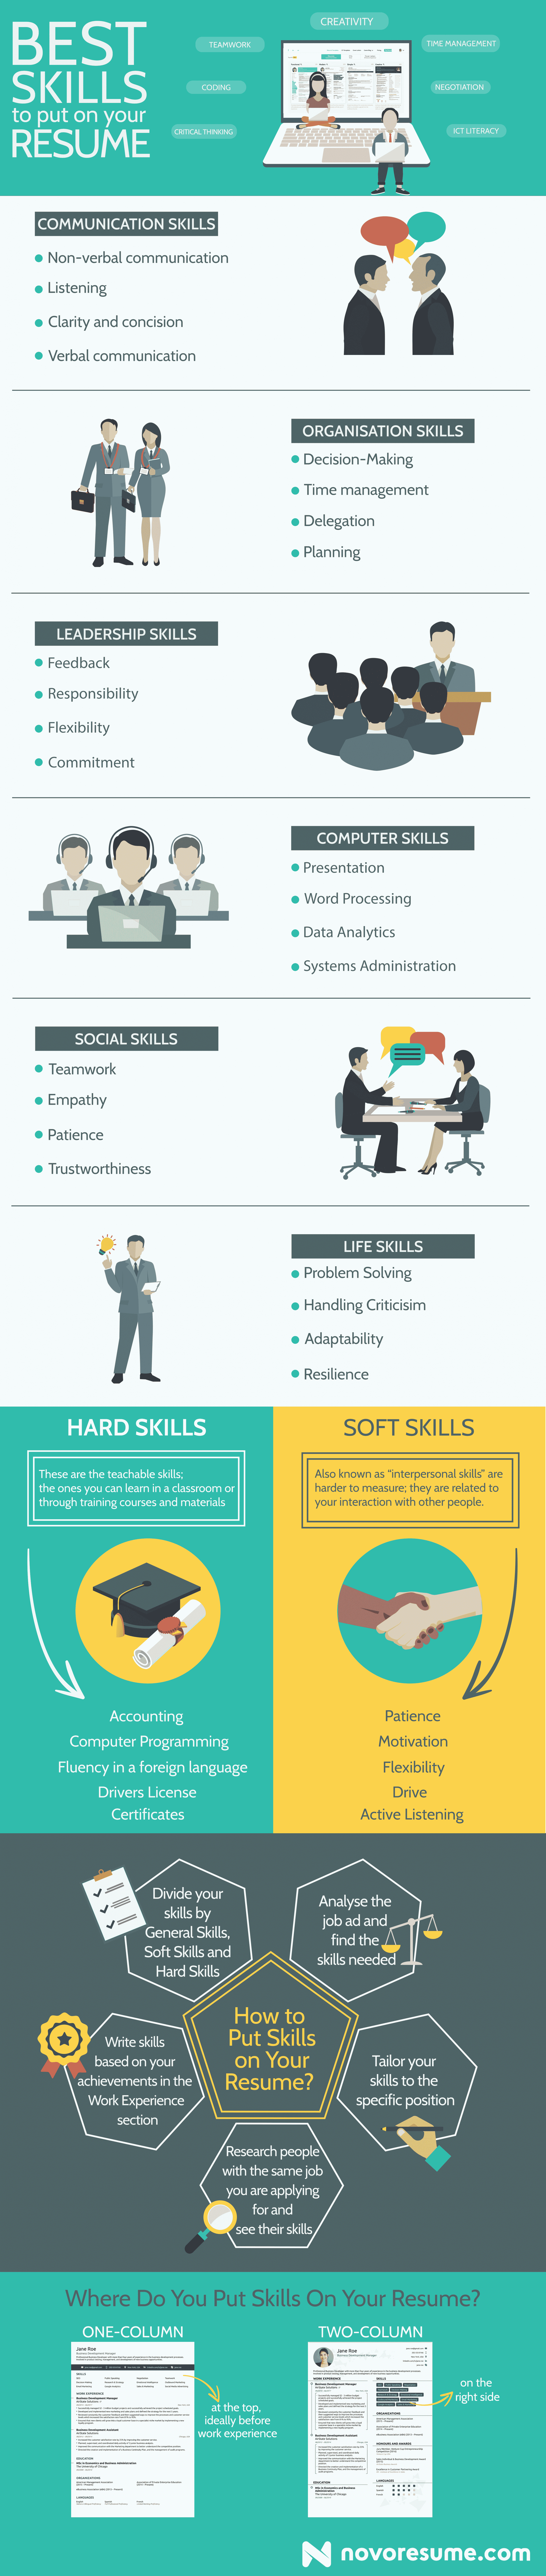 The 8 Best Skills to Put on Your Resume (INFOGRAPHIC)